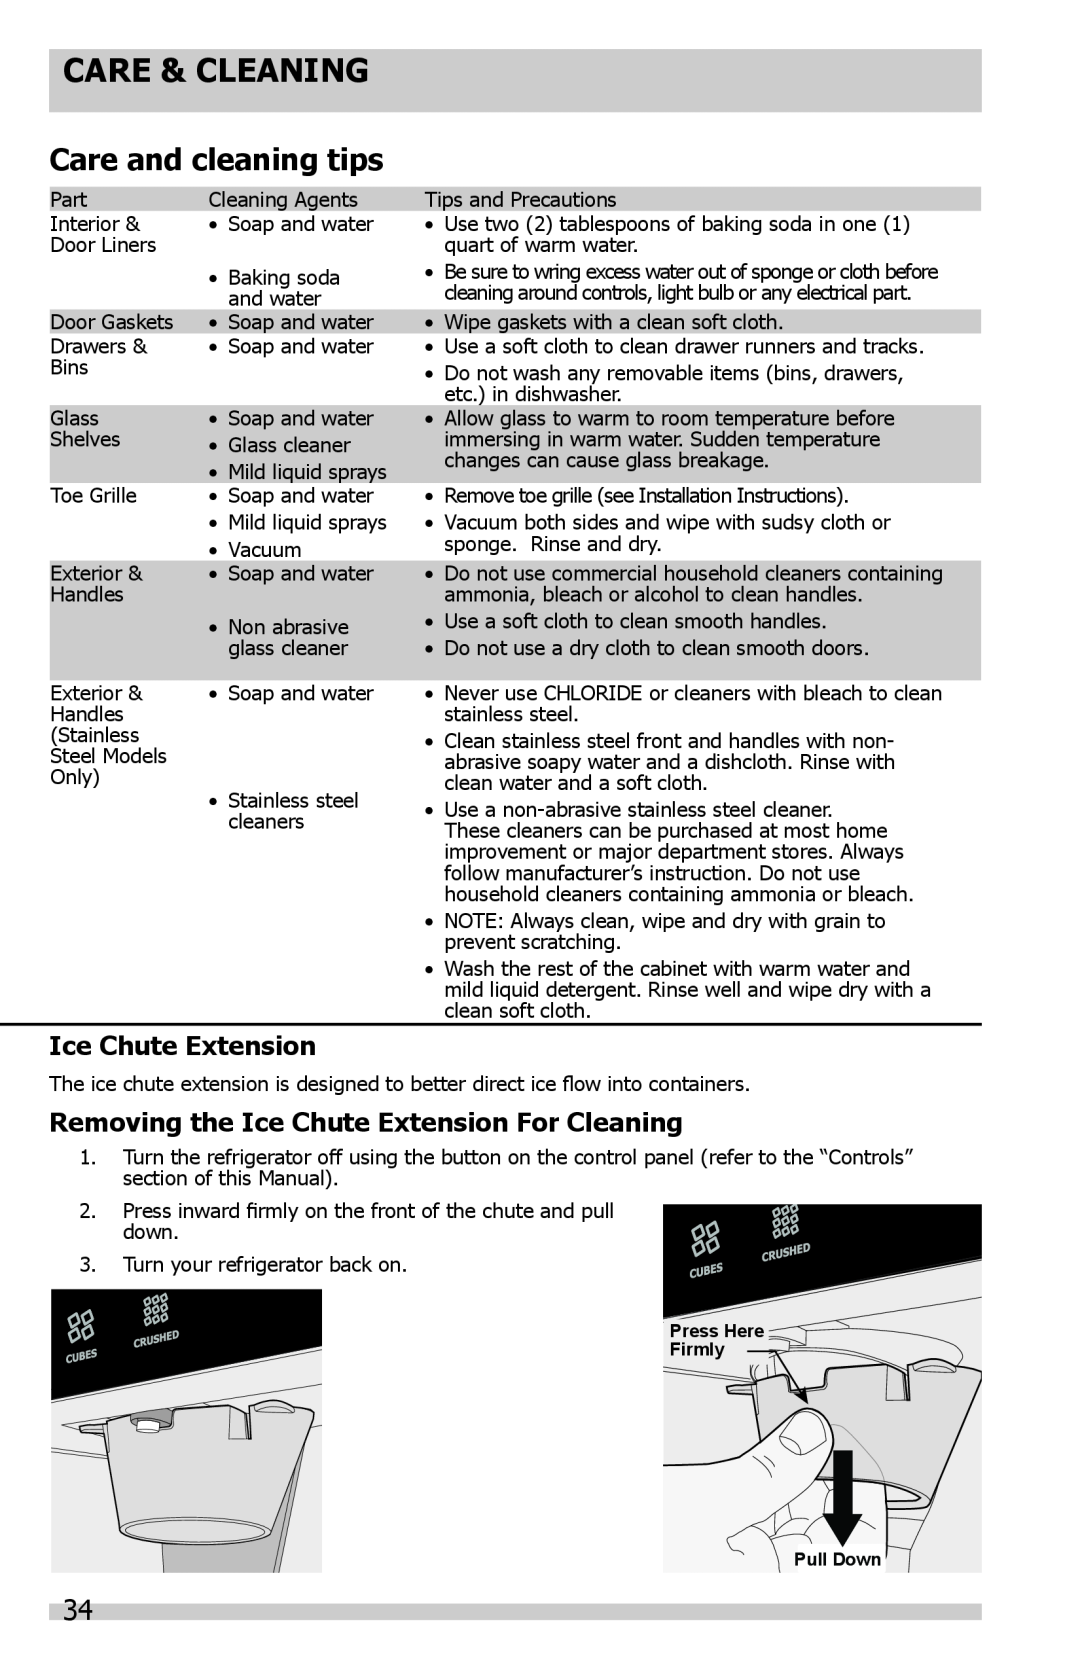 Frigidaire FGHB2844LF Care and cleaning tips, Removing the Ice Chute Extension For Cleaning, Care & Cleaning 